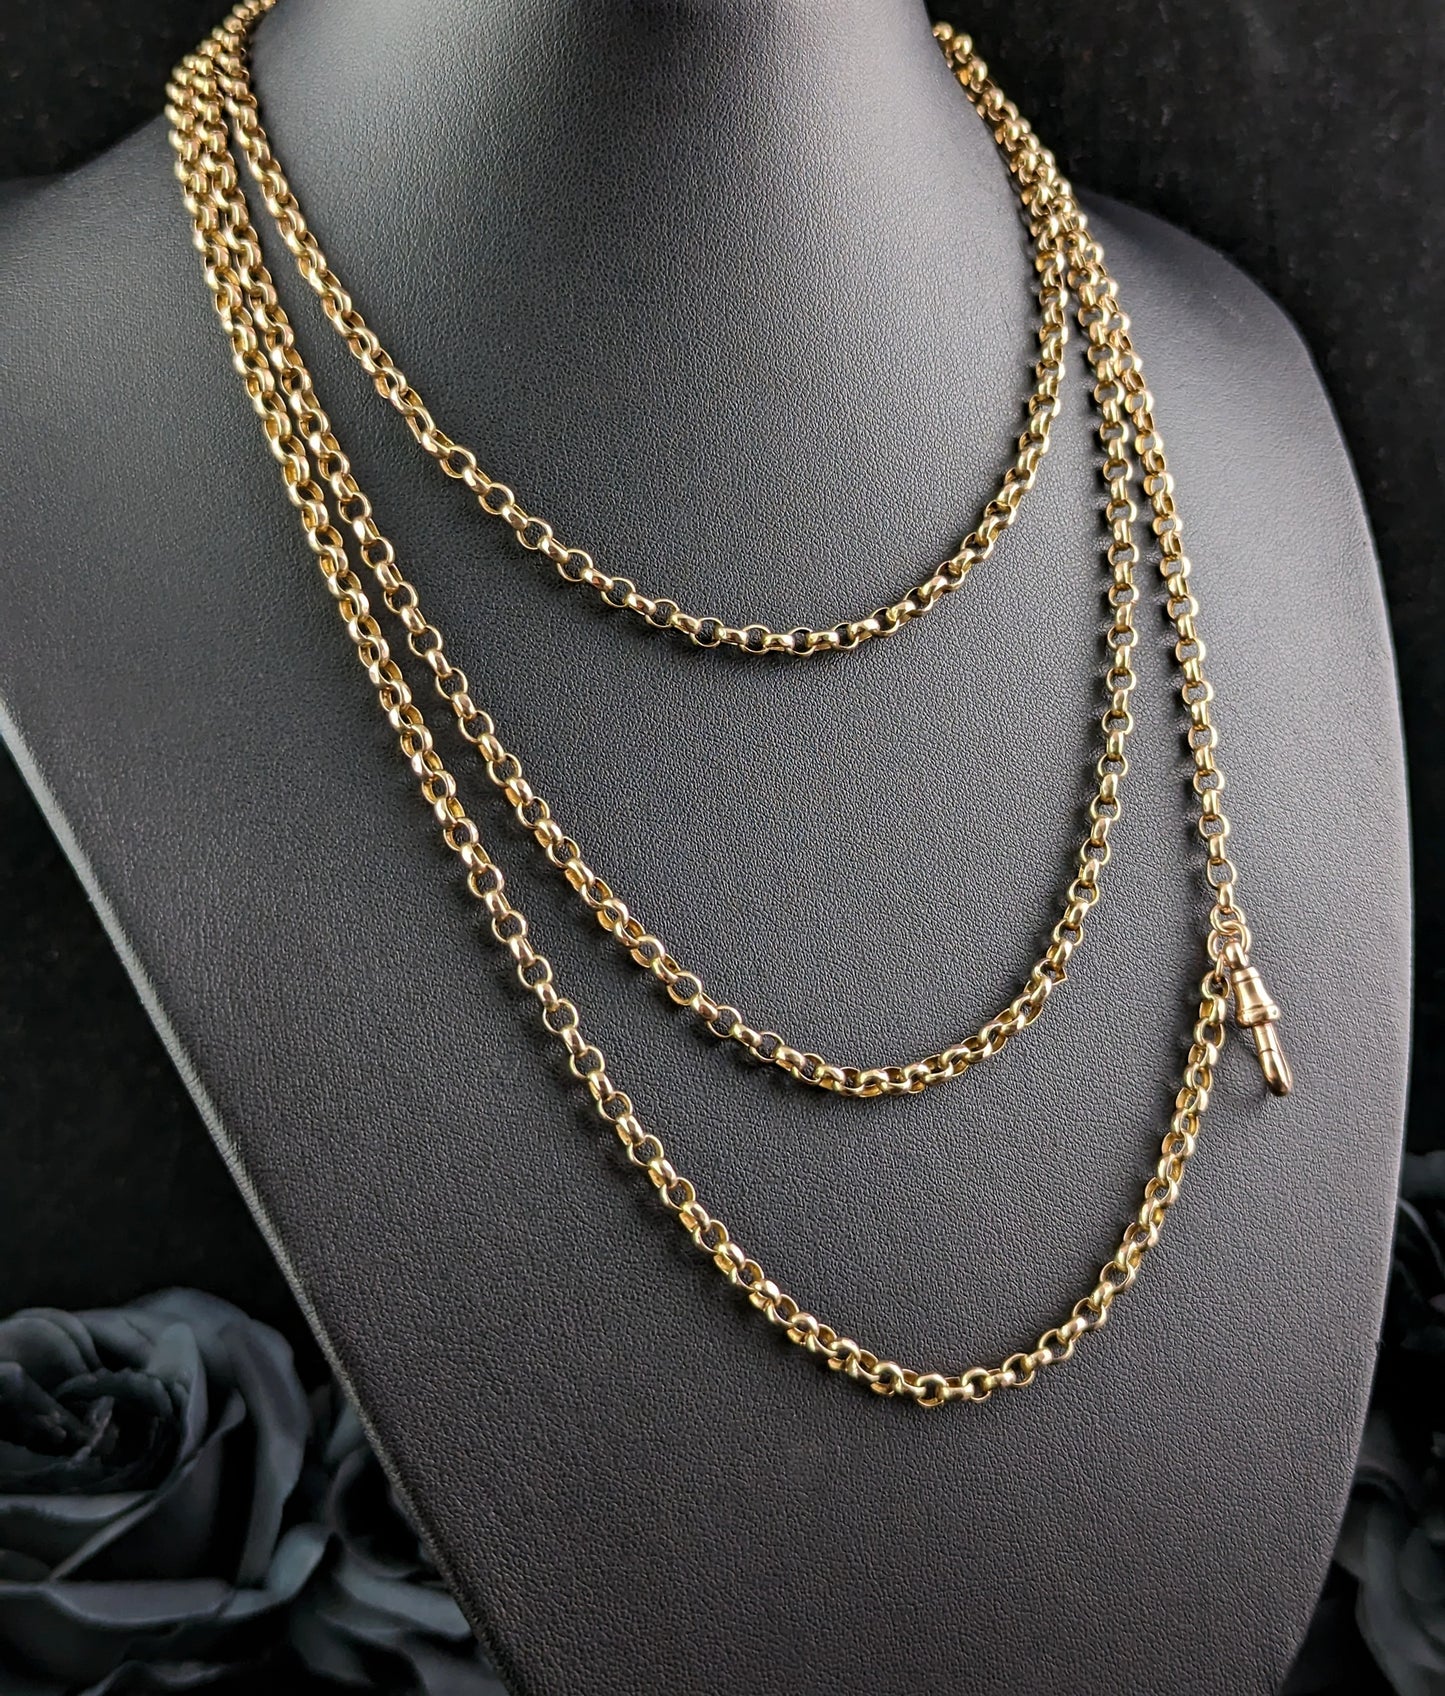 Antique 9ct gold longuard chain necklace, muff chain, Rolo link